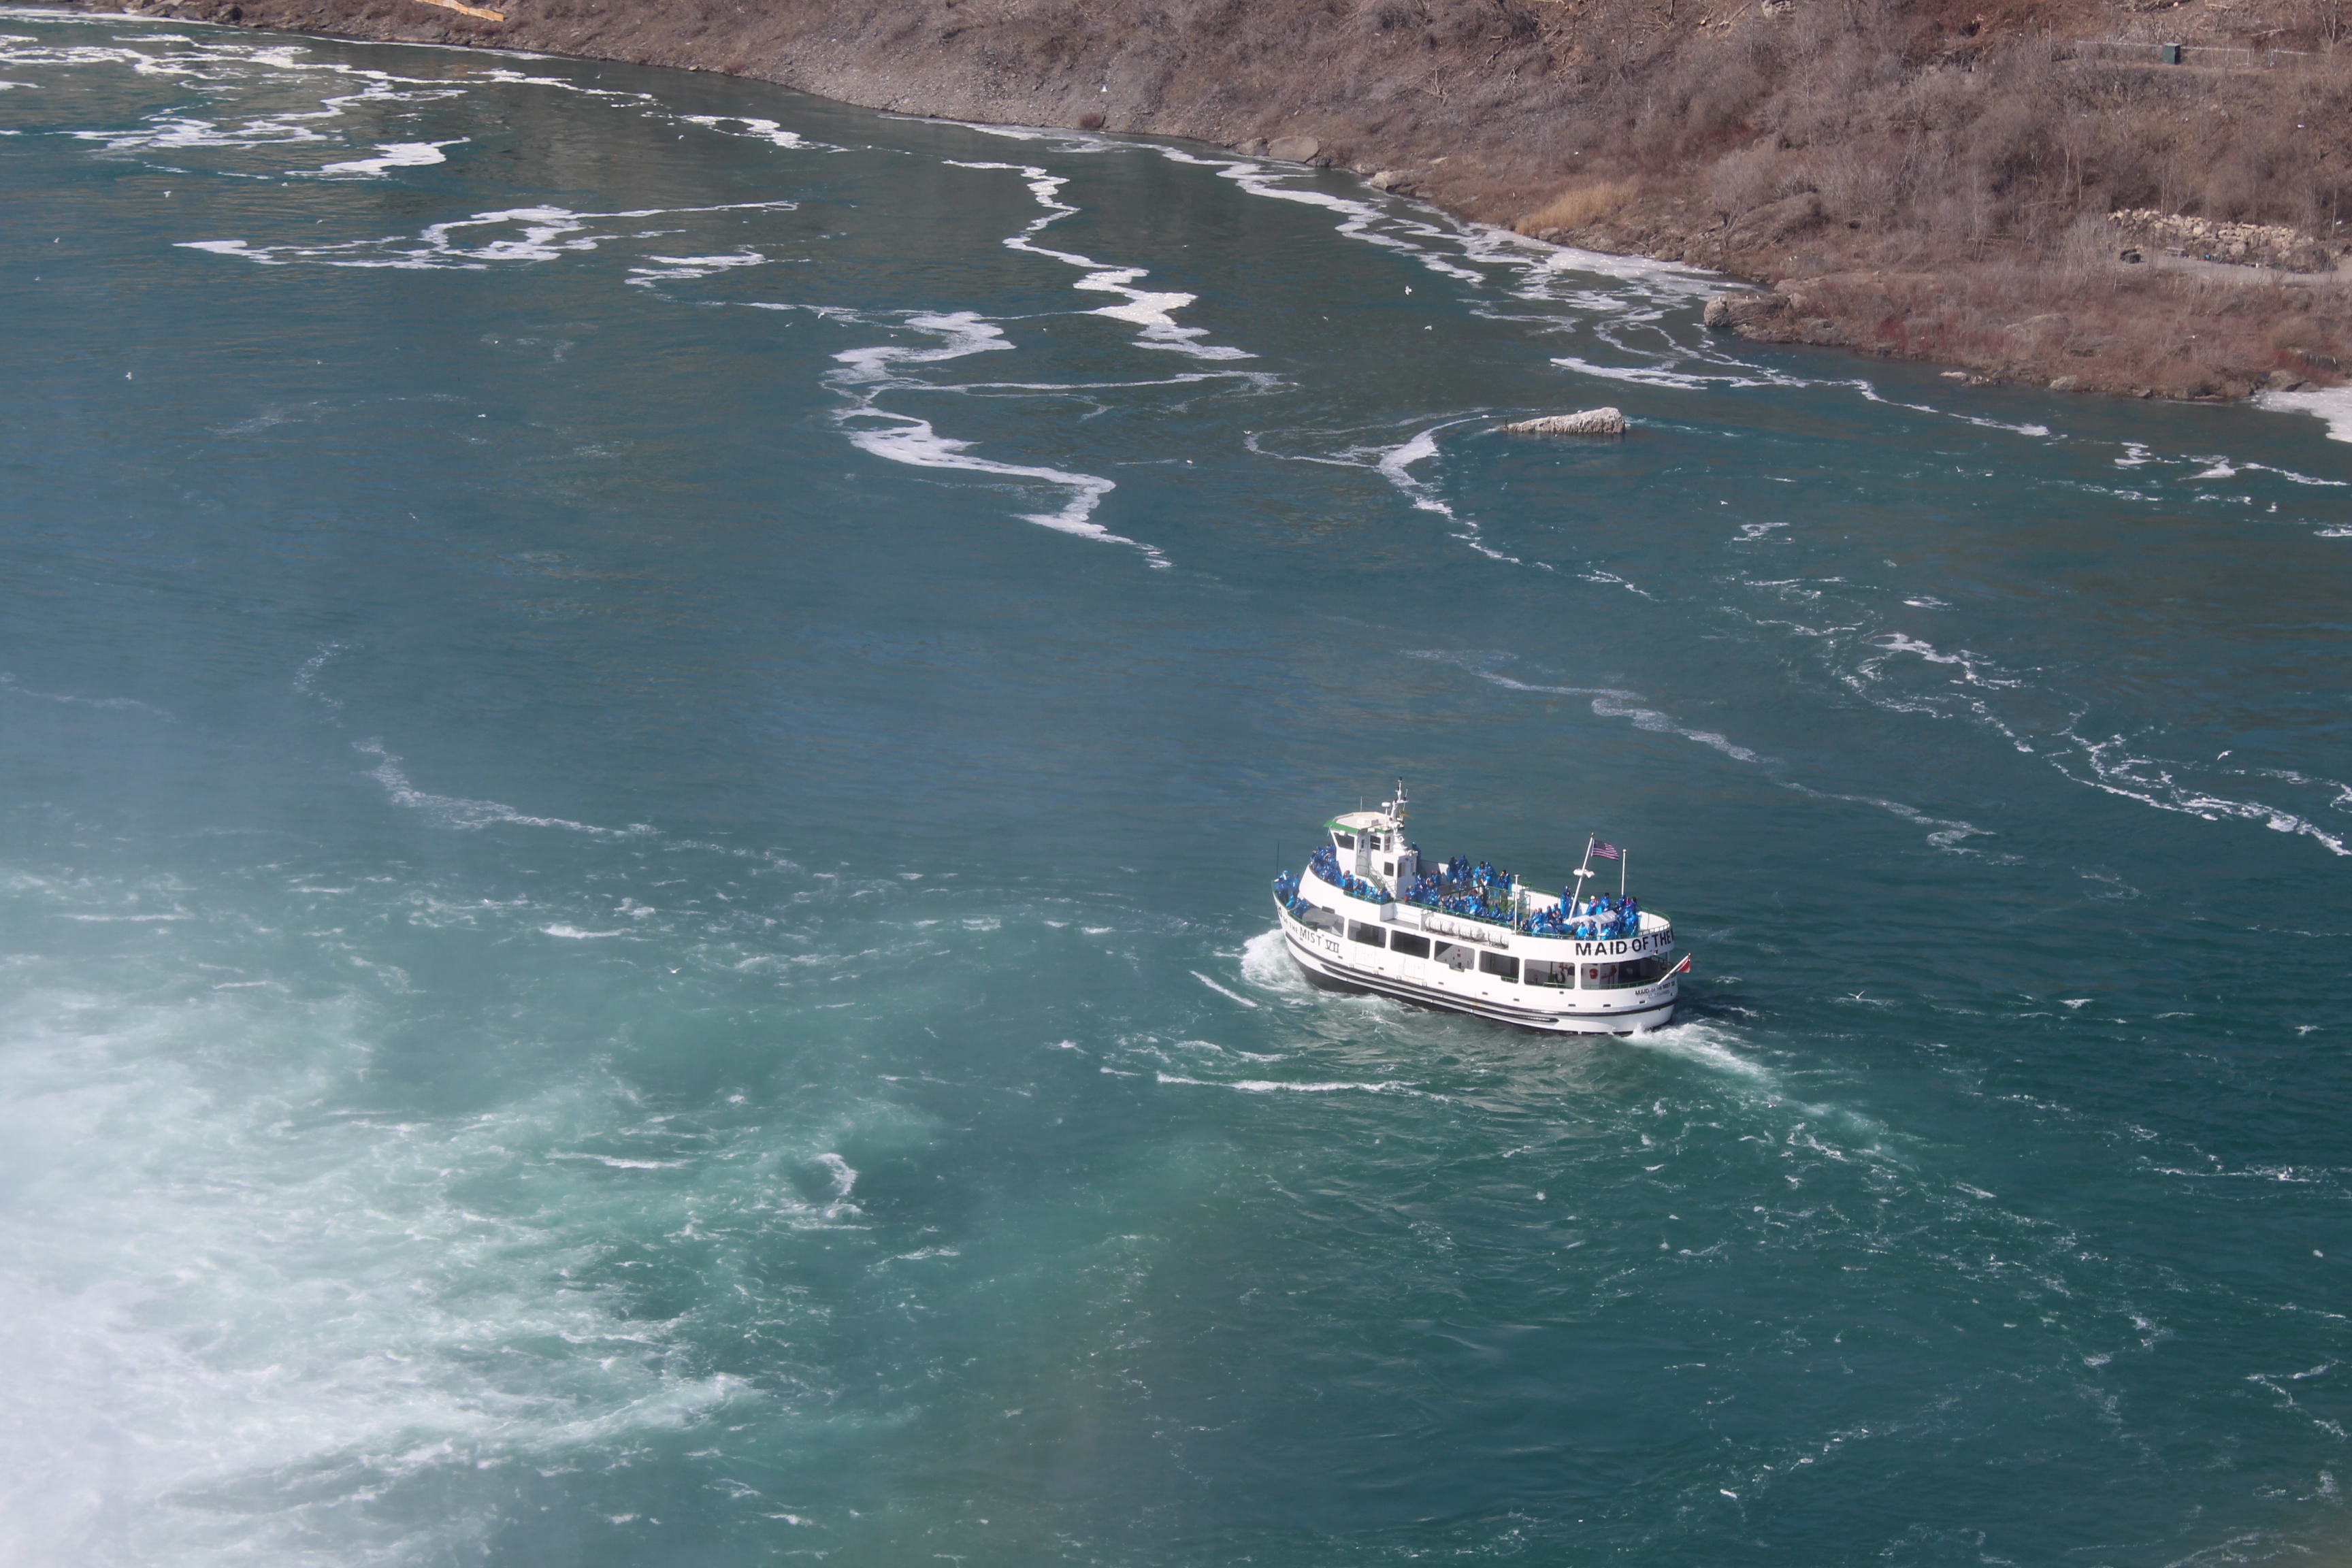 Maid of the Mist boat tour